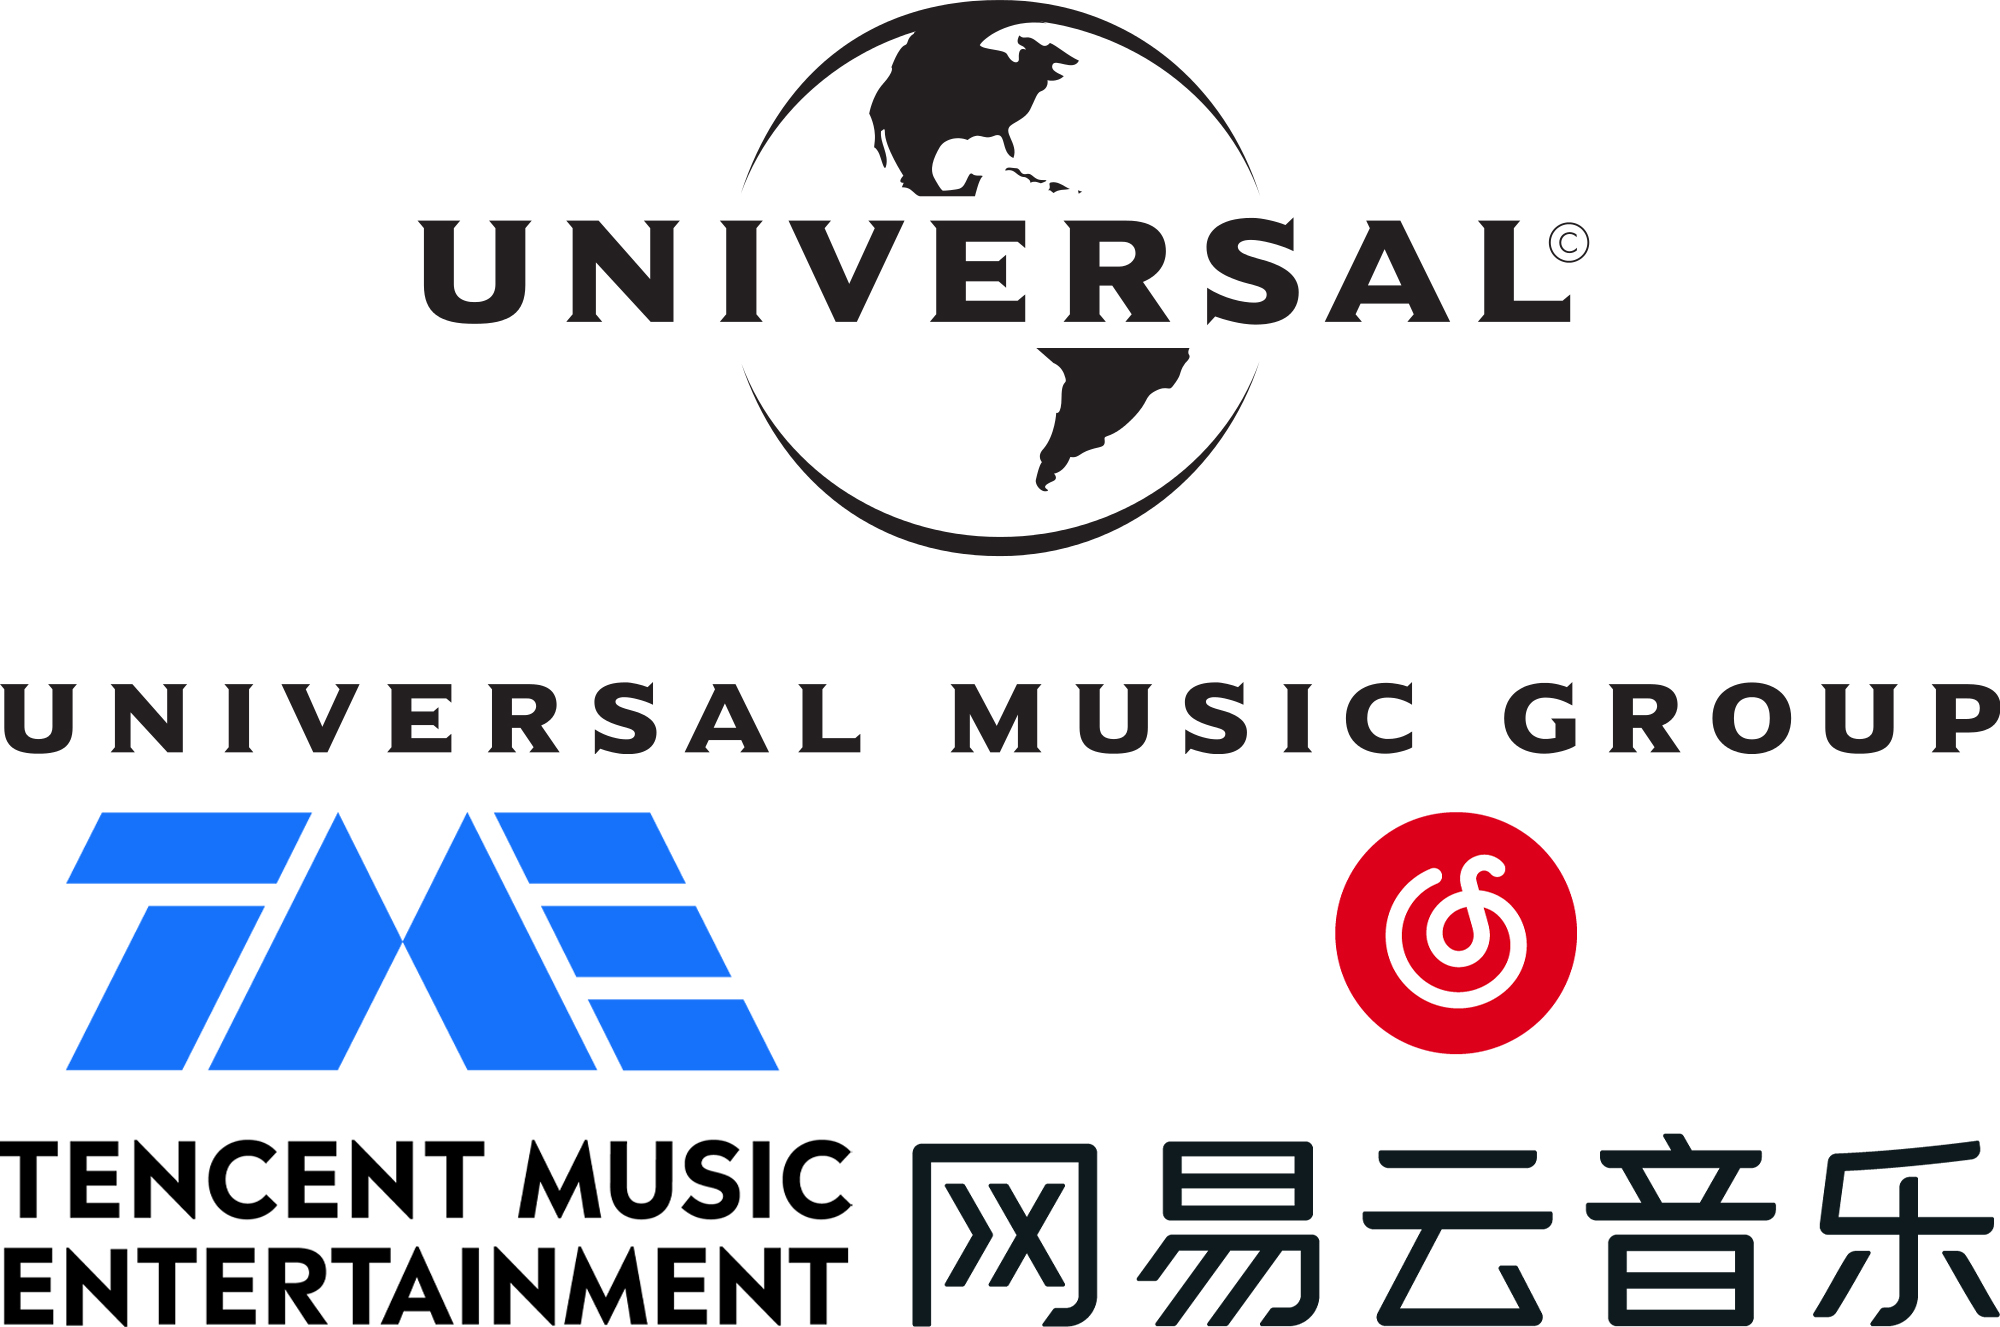 Universal sign deals with Chinese companies Tencent and NetEase